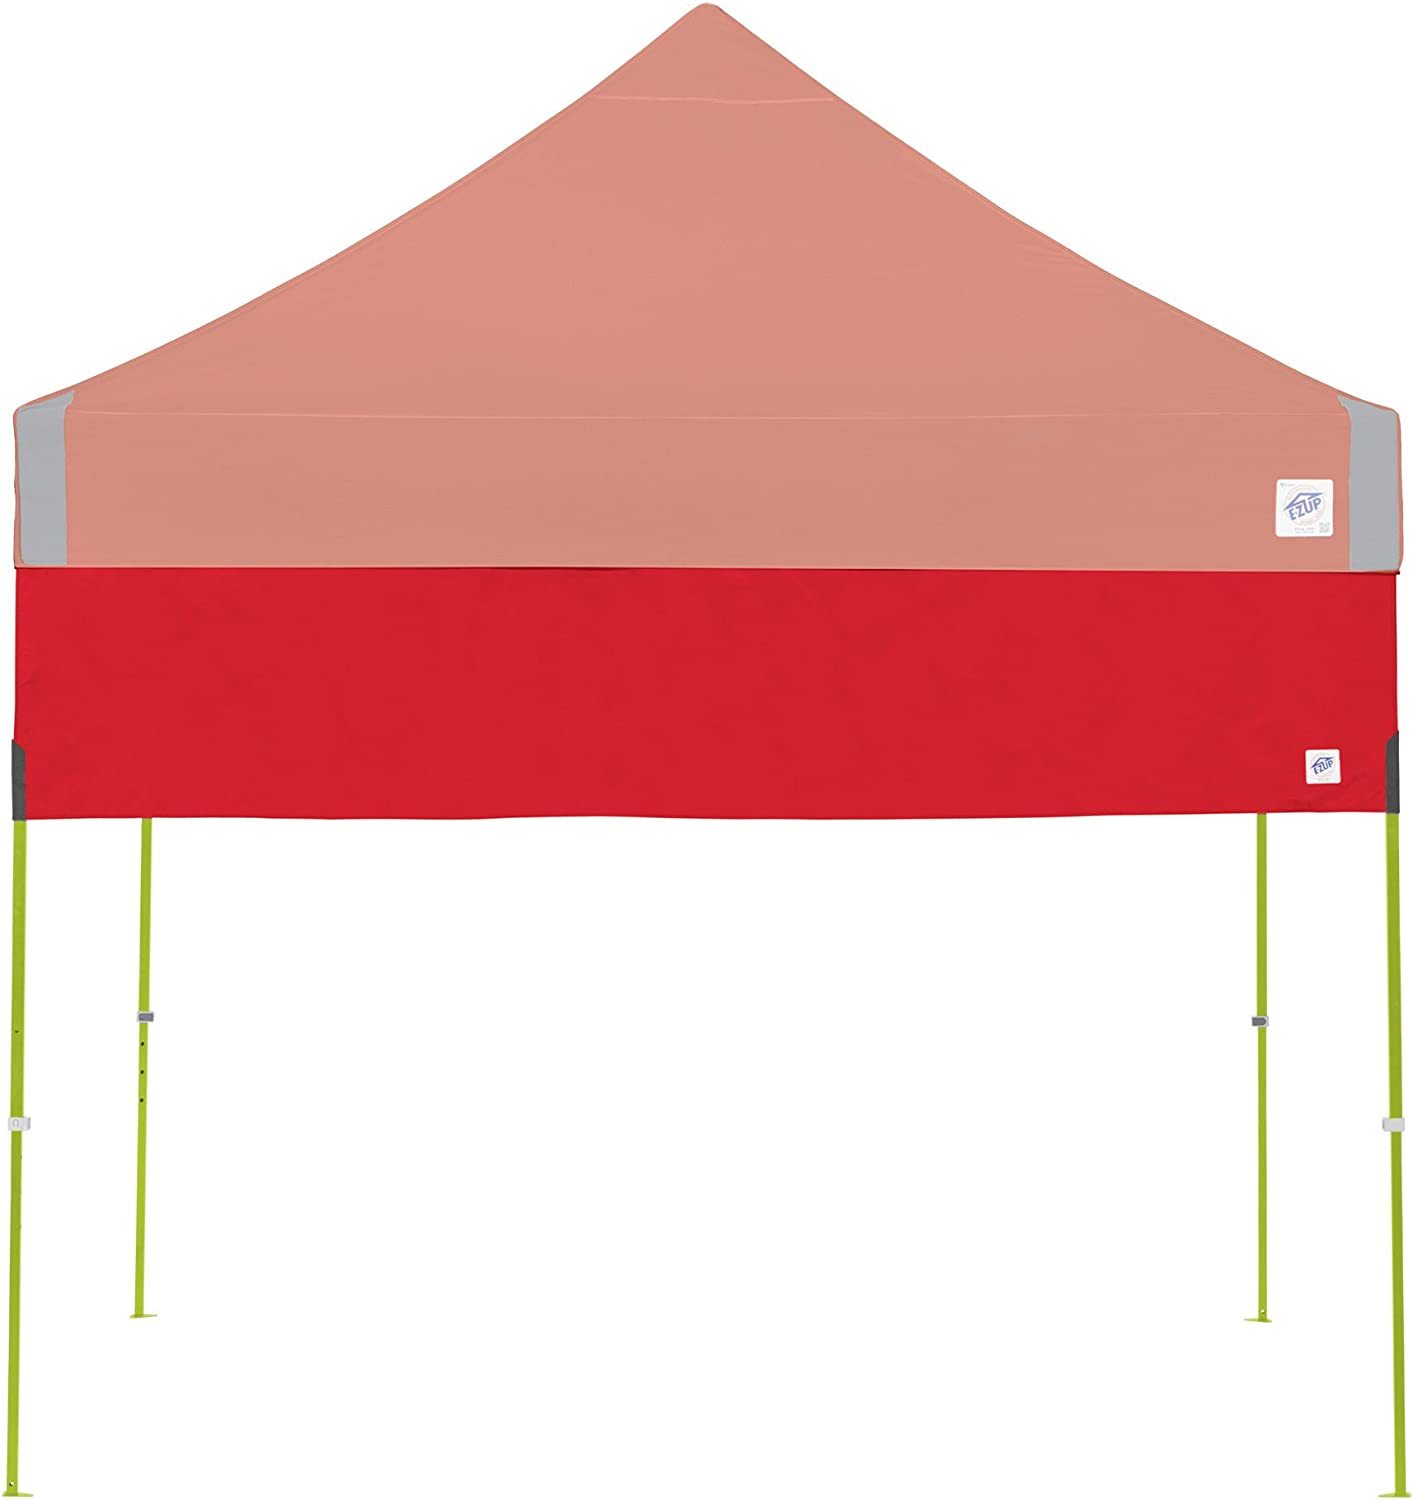 Primary image for E-Z UP Recreational Half Wall, Fits Straight Leg 10' x 10' Canopy, Truss, Punch